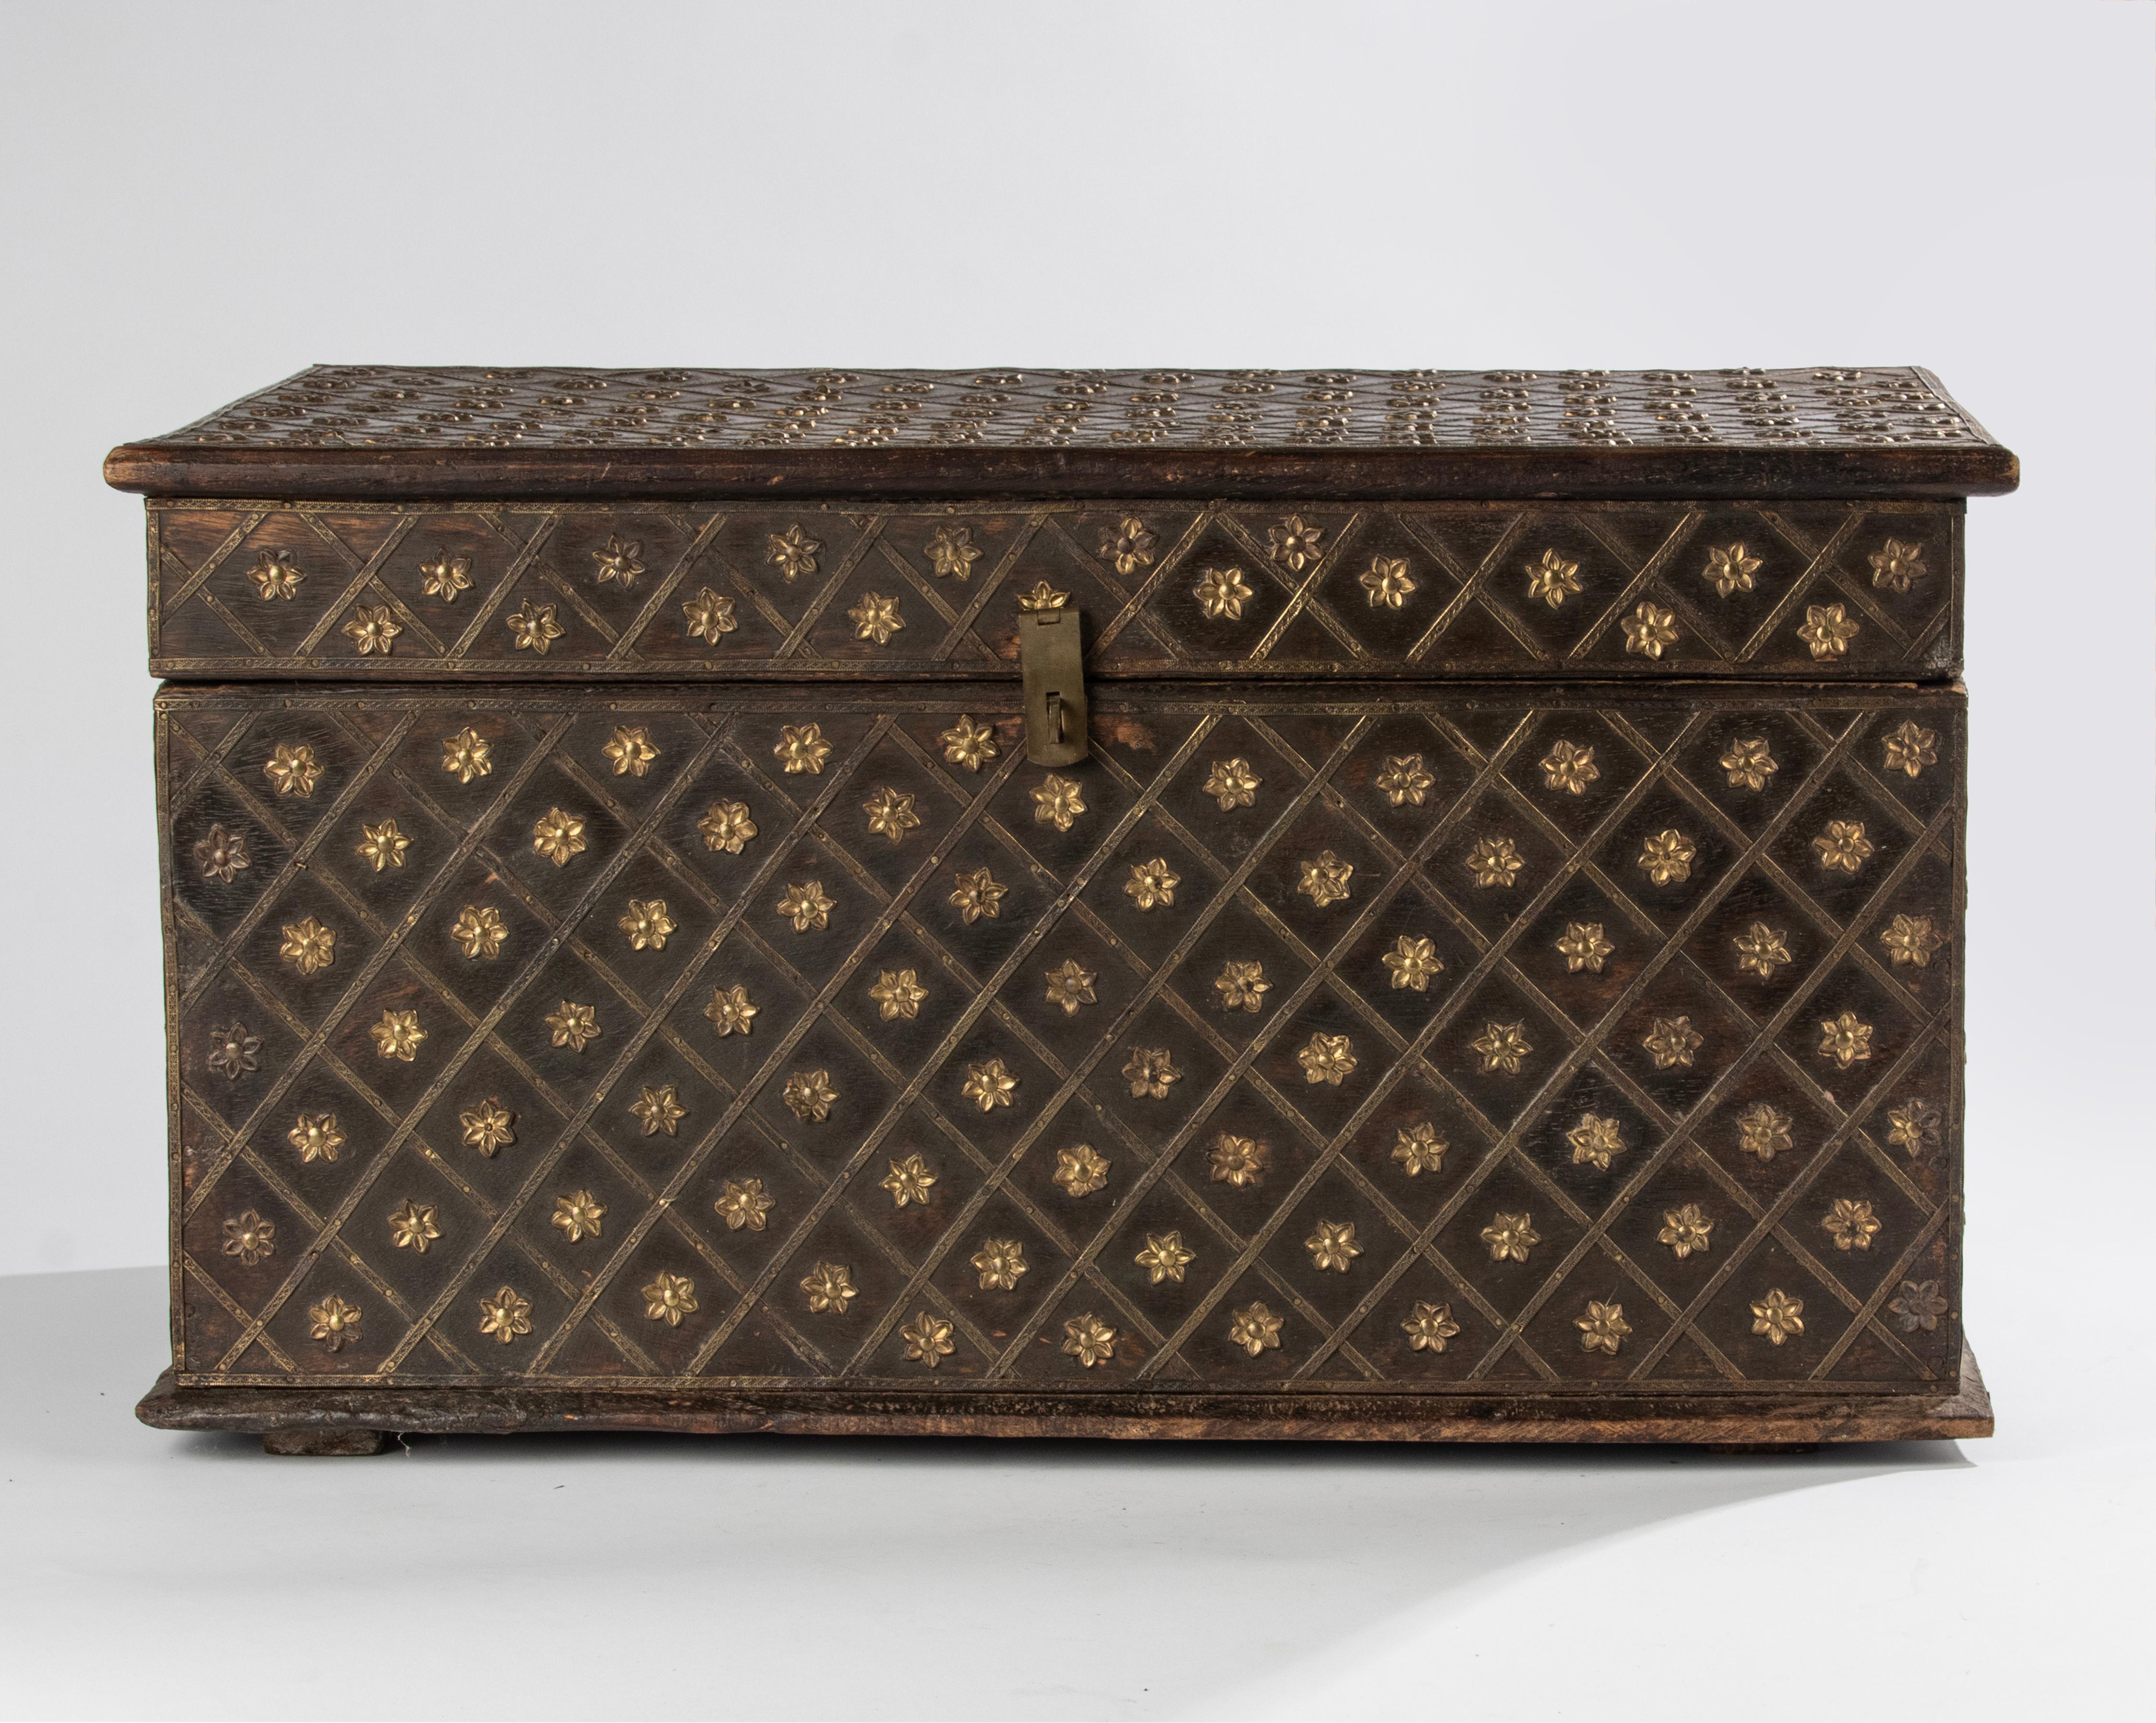 A beautiful decorative storage chest. The chest is made of solid oak. At the front, top and both sides a copper diamond pattern with flower motifs. On both side brass handles. Made in France around 1890-1900. This chest with a beautiful old patina